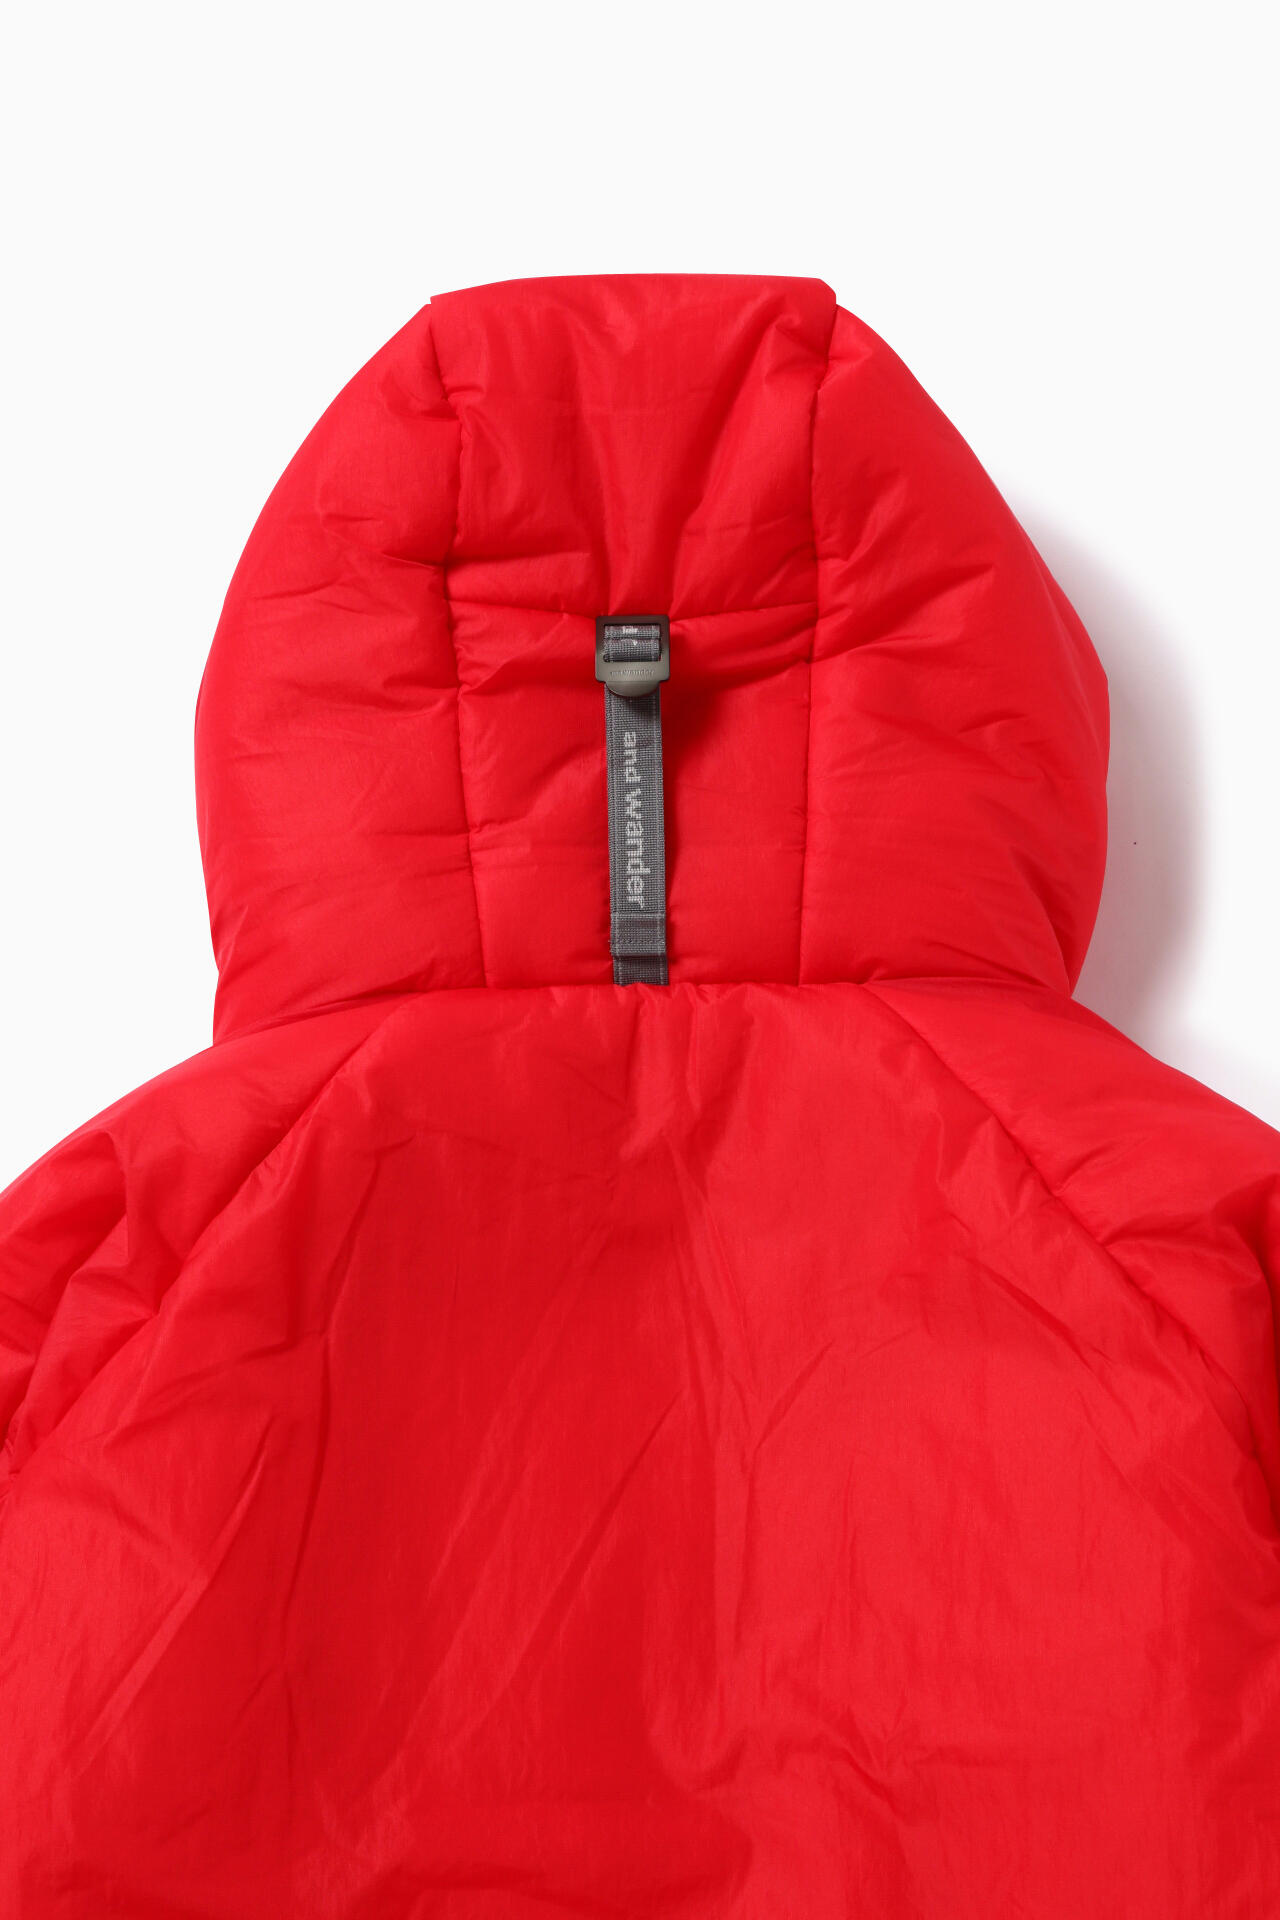 MAISON KITSUNÉ × and wander insulation jacket | outerwear | and 